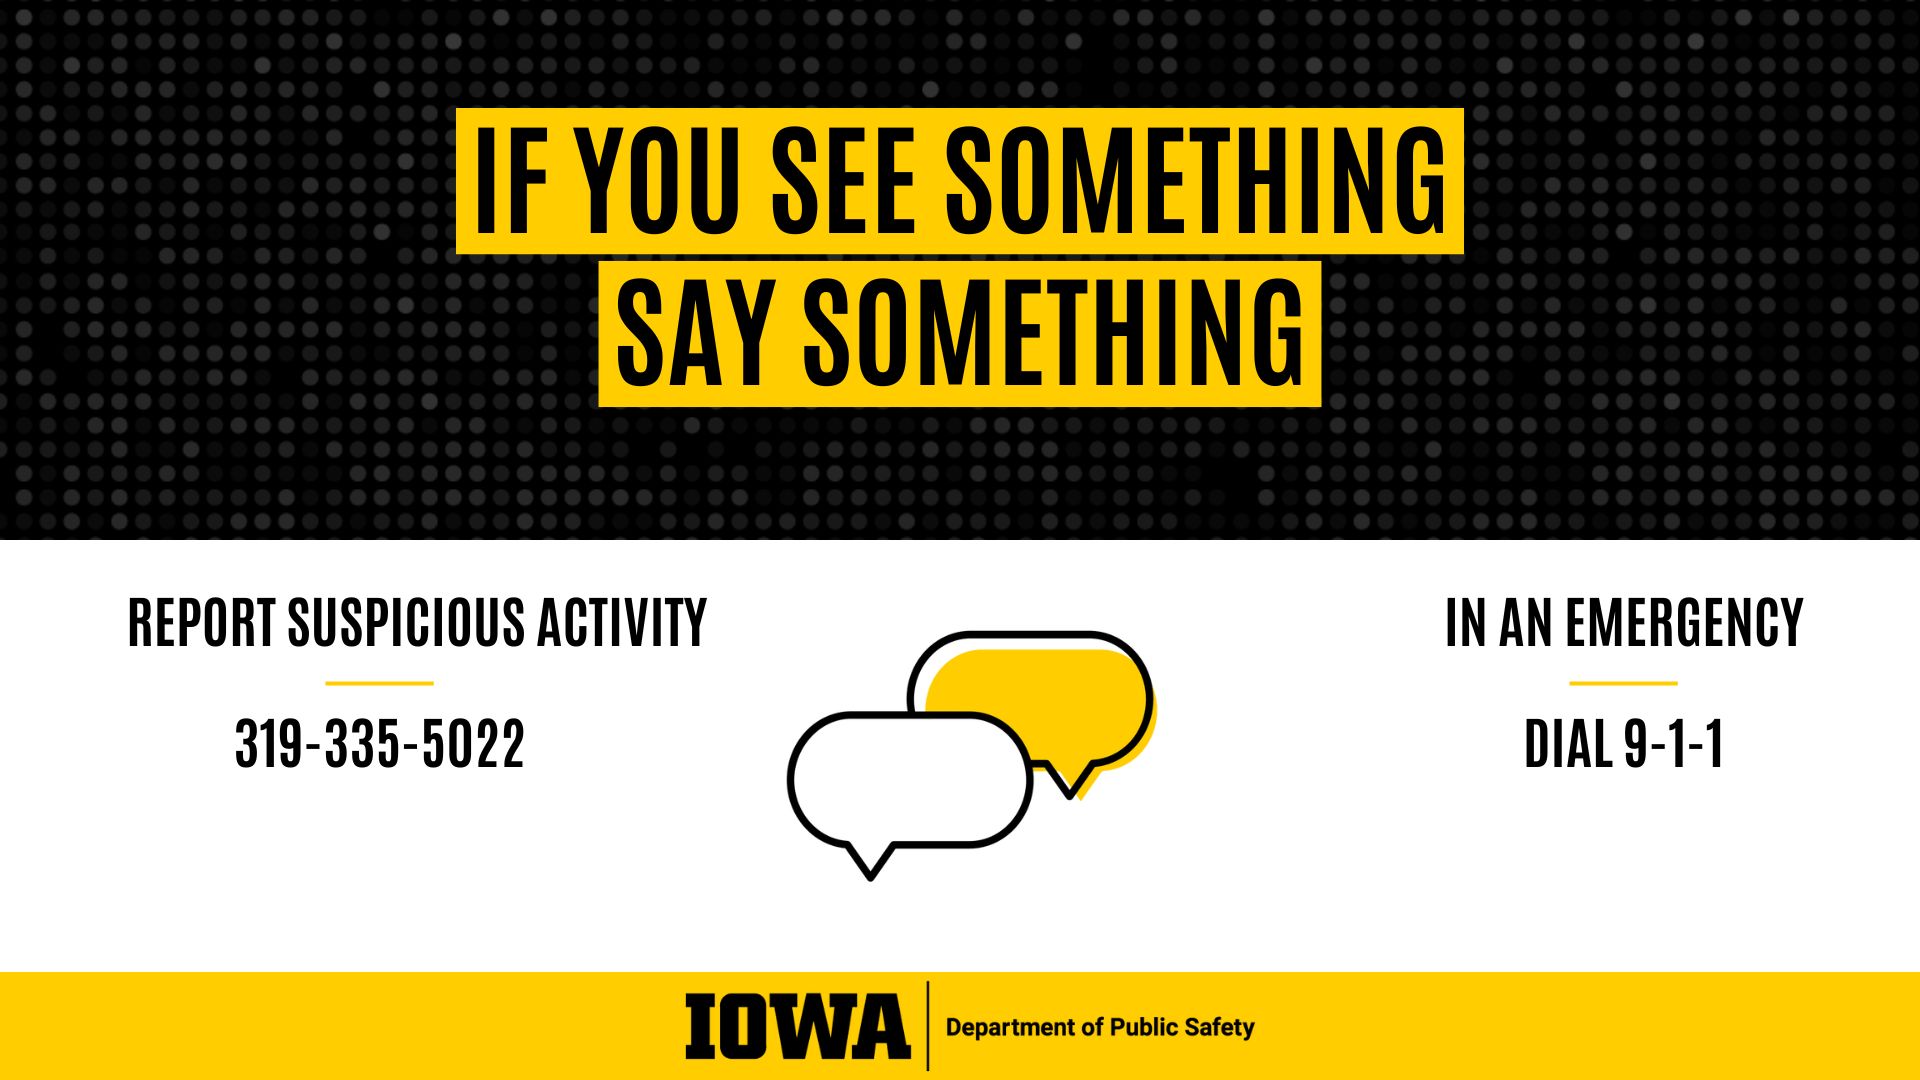 If you see something say something report suspicious activity 319-335-5022 in an emergency dial 911